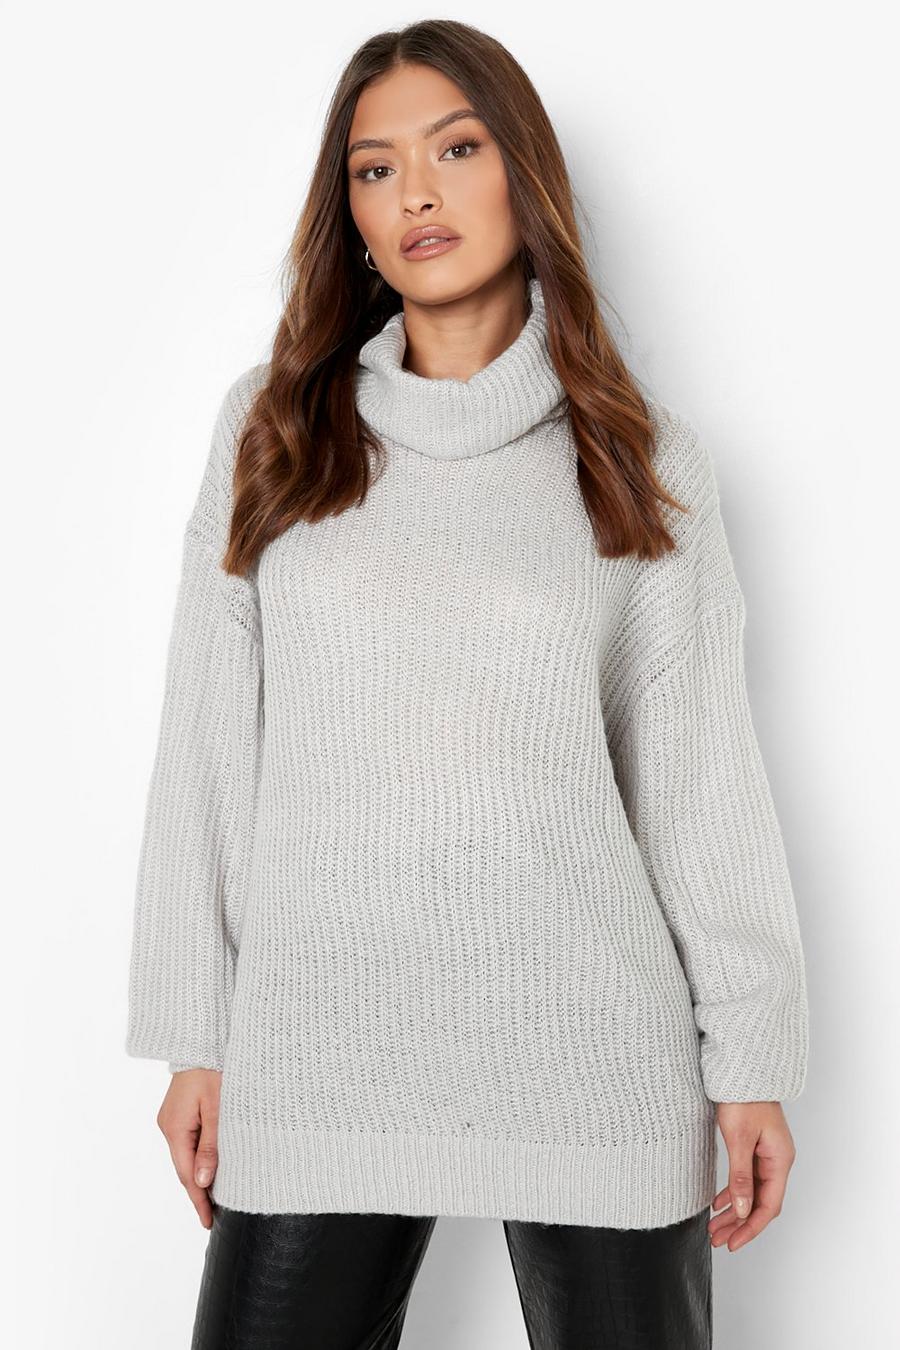 Silver grey Oversized Turtleneck Rib Knitted Sweater image number 1